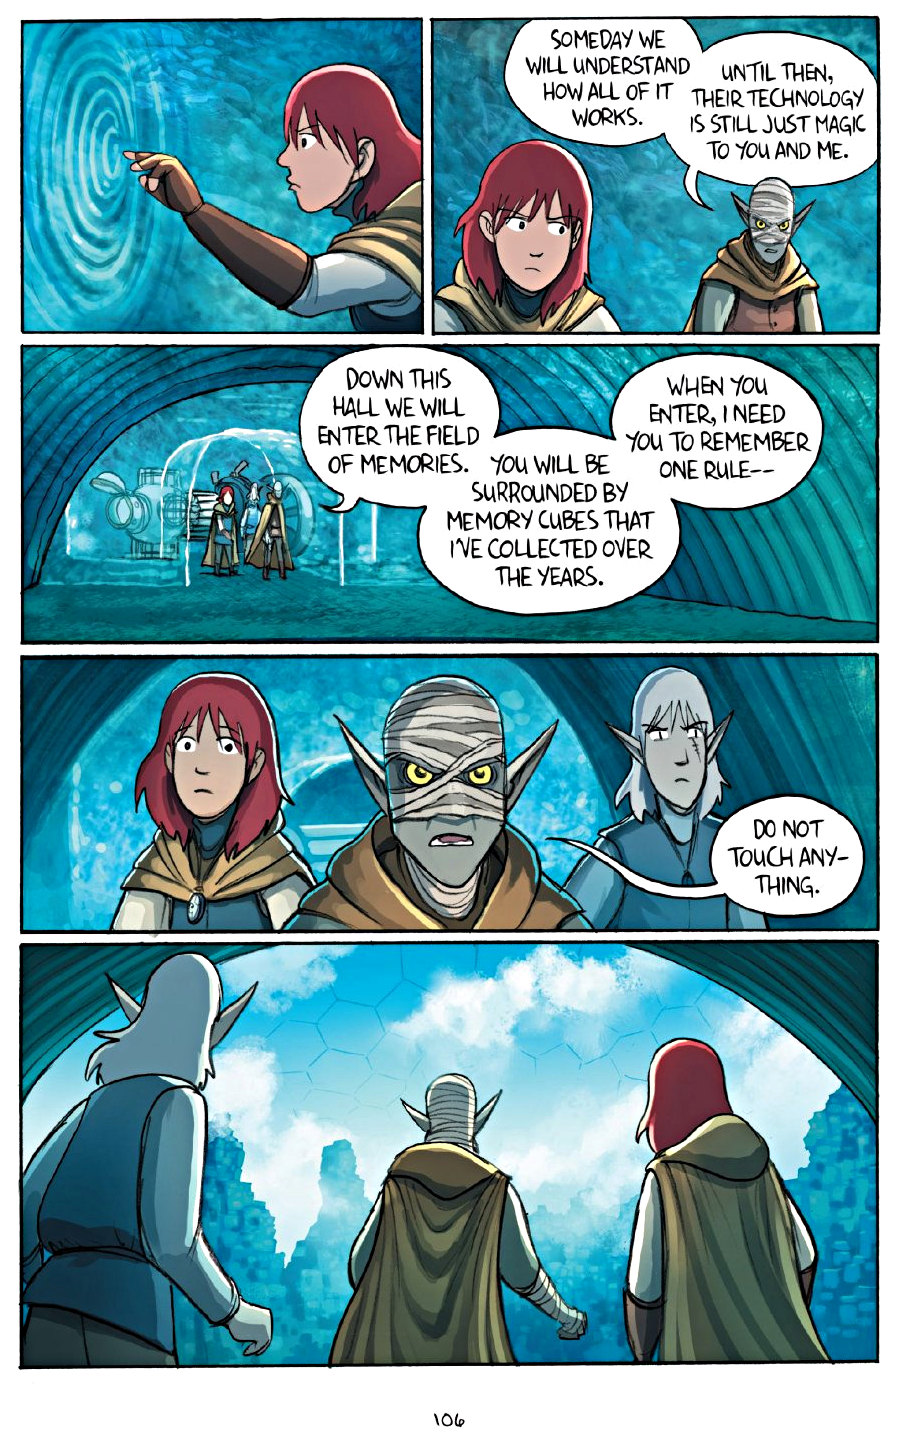 page 106 of amulet 7 firelight graphic novel